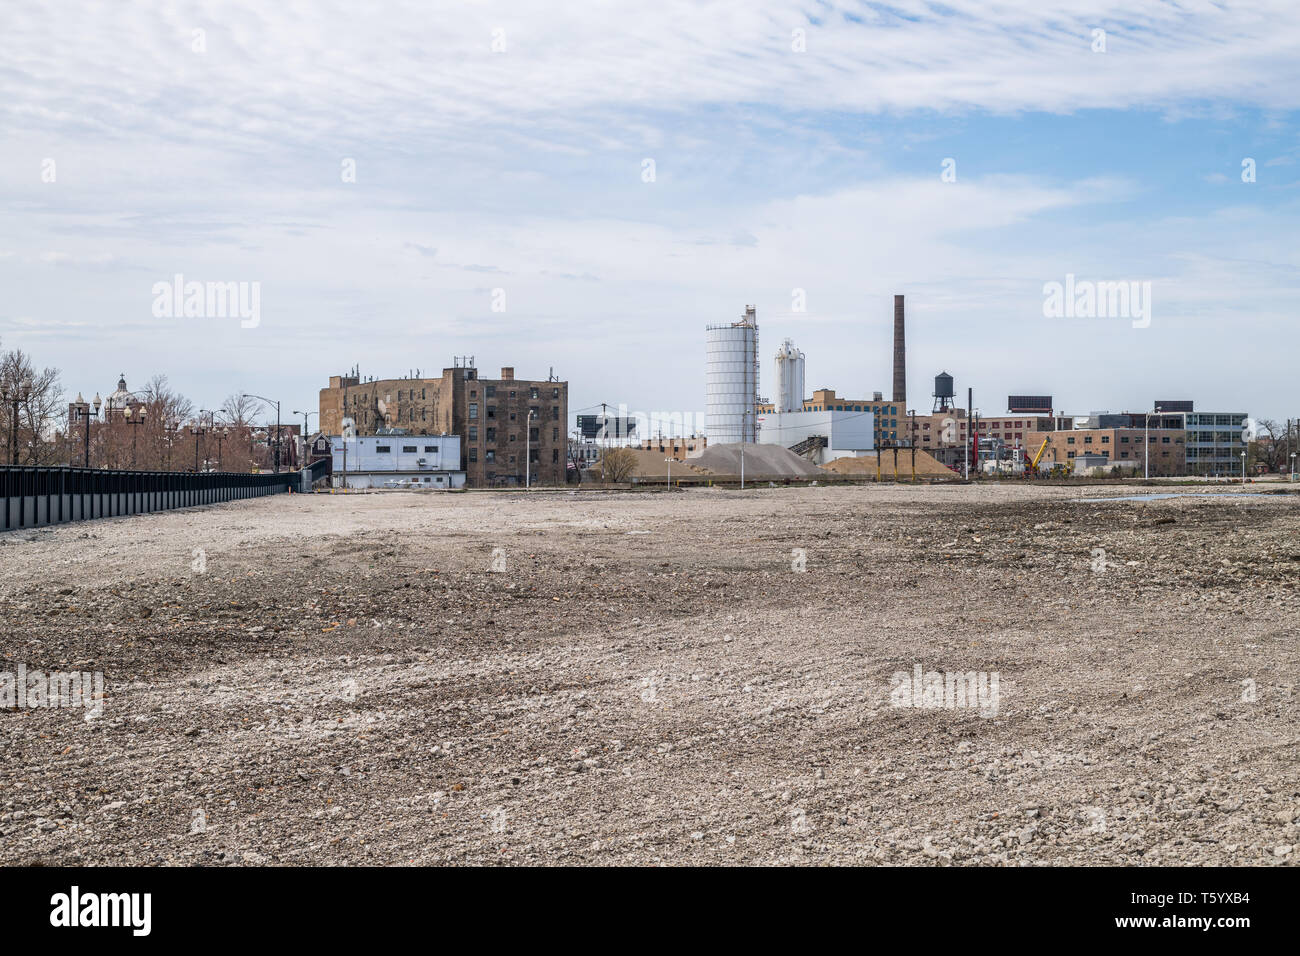 Former site of Finkl Steel, demolished to make way for Lincoln Yards development Stock Photo